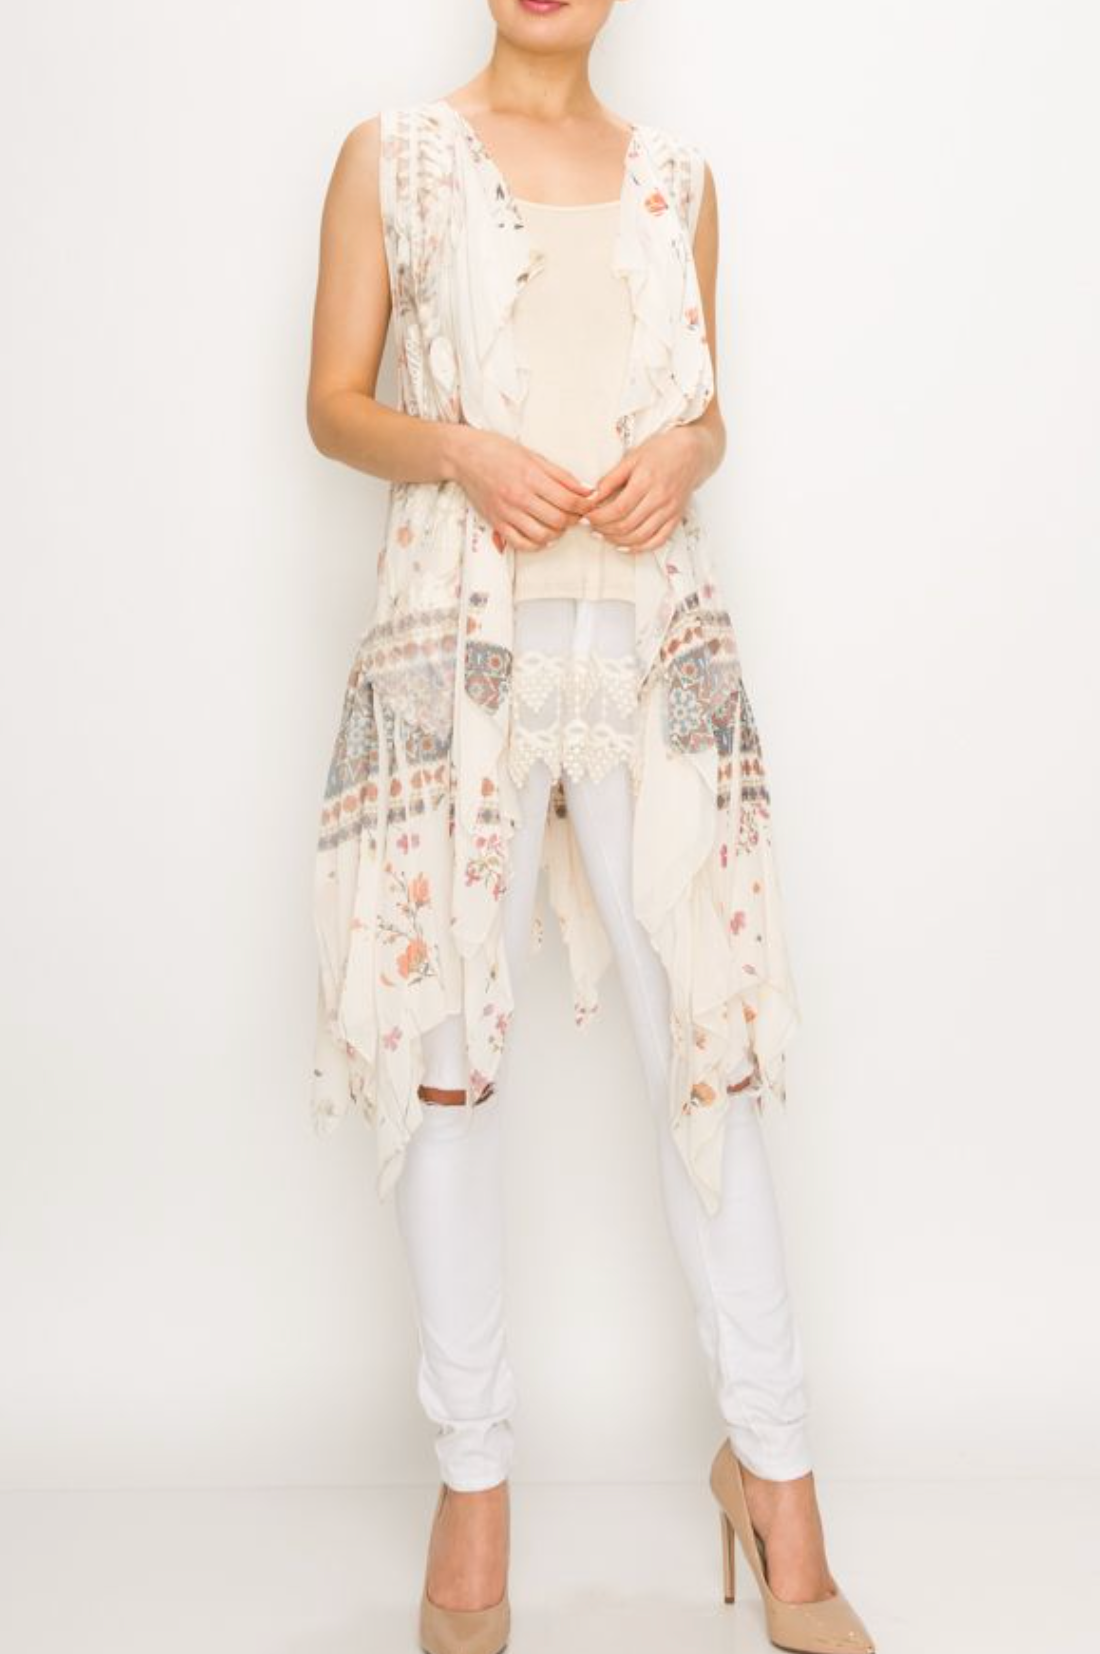 Country Chic Vest